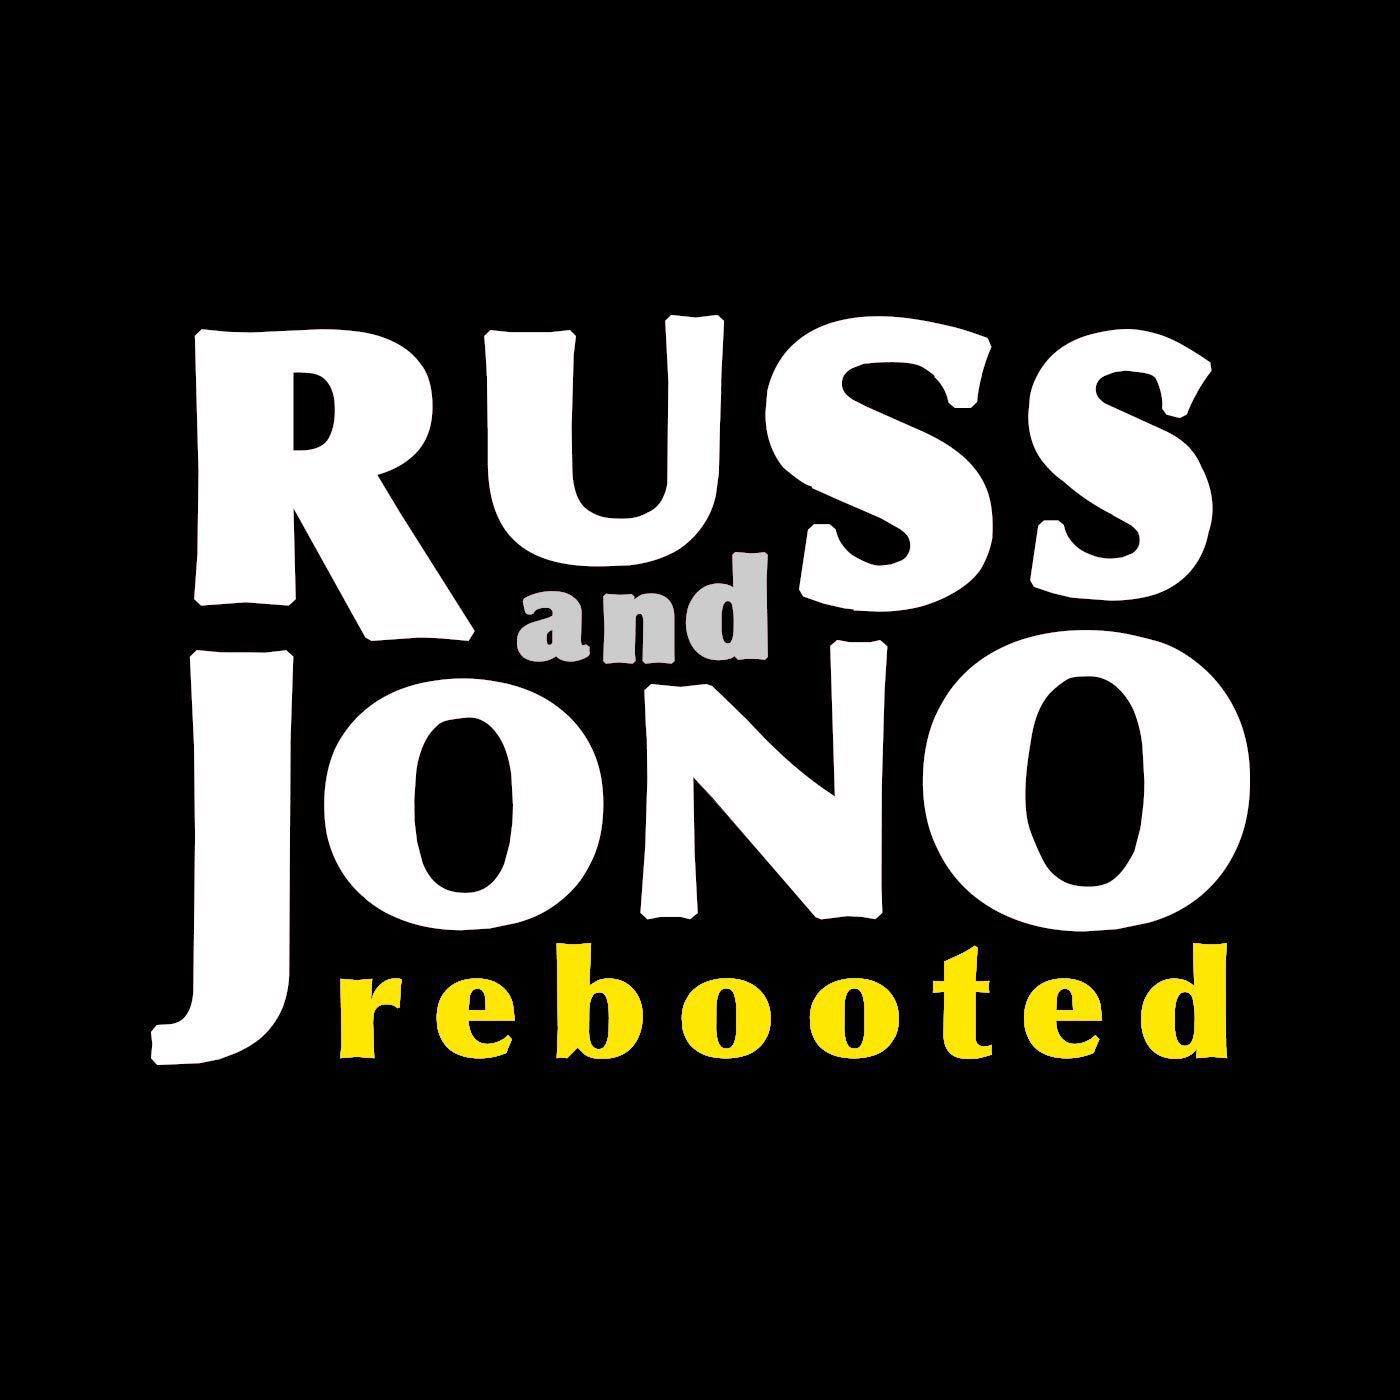 S1 Ep7: Russ and Jono Rebooted - 3 - Bitch!